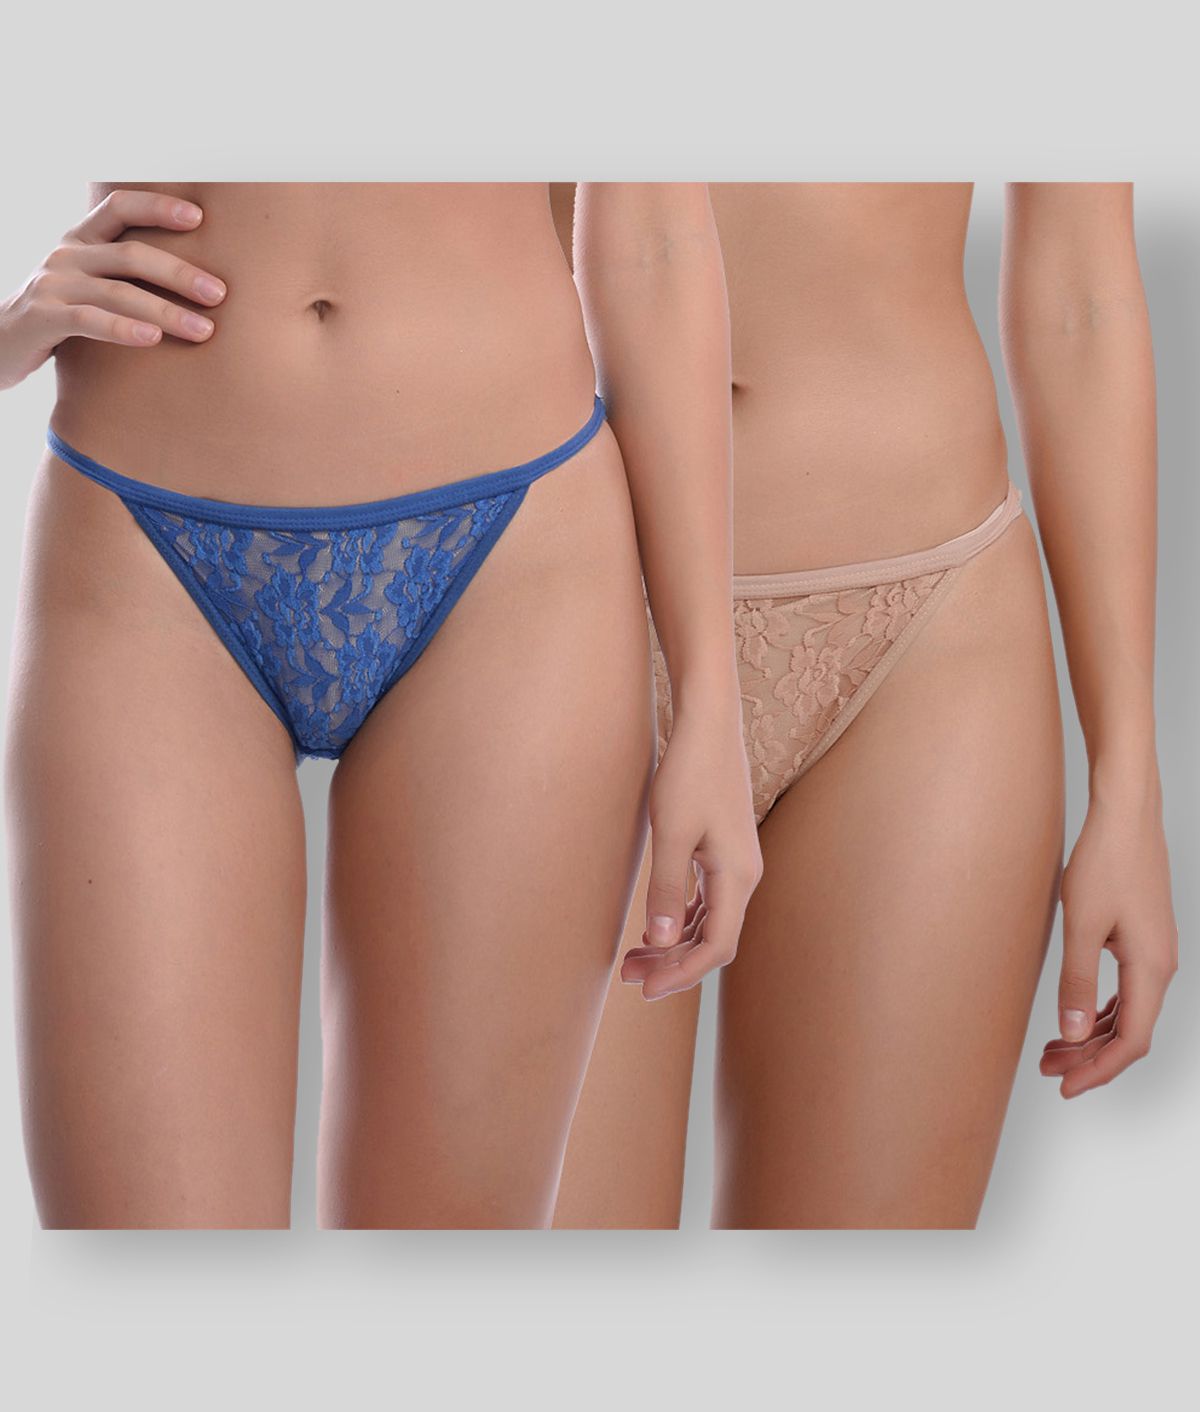     			Madam - Multicolor Lace Self Design Women's G-Strings ( Pack of 2 )